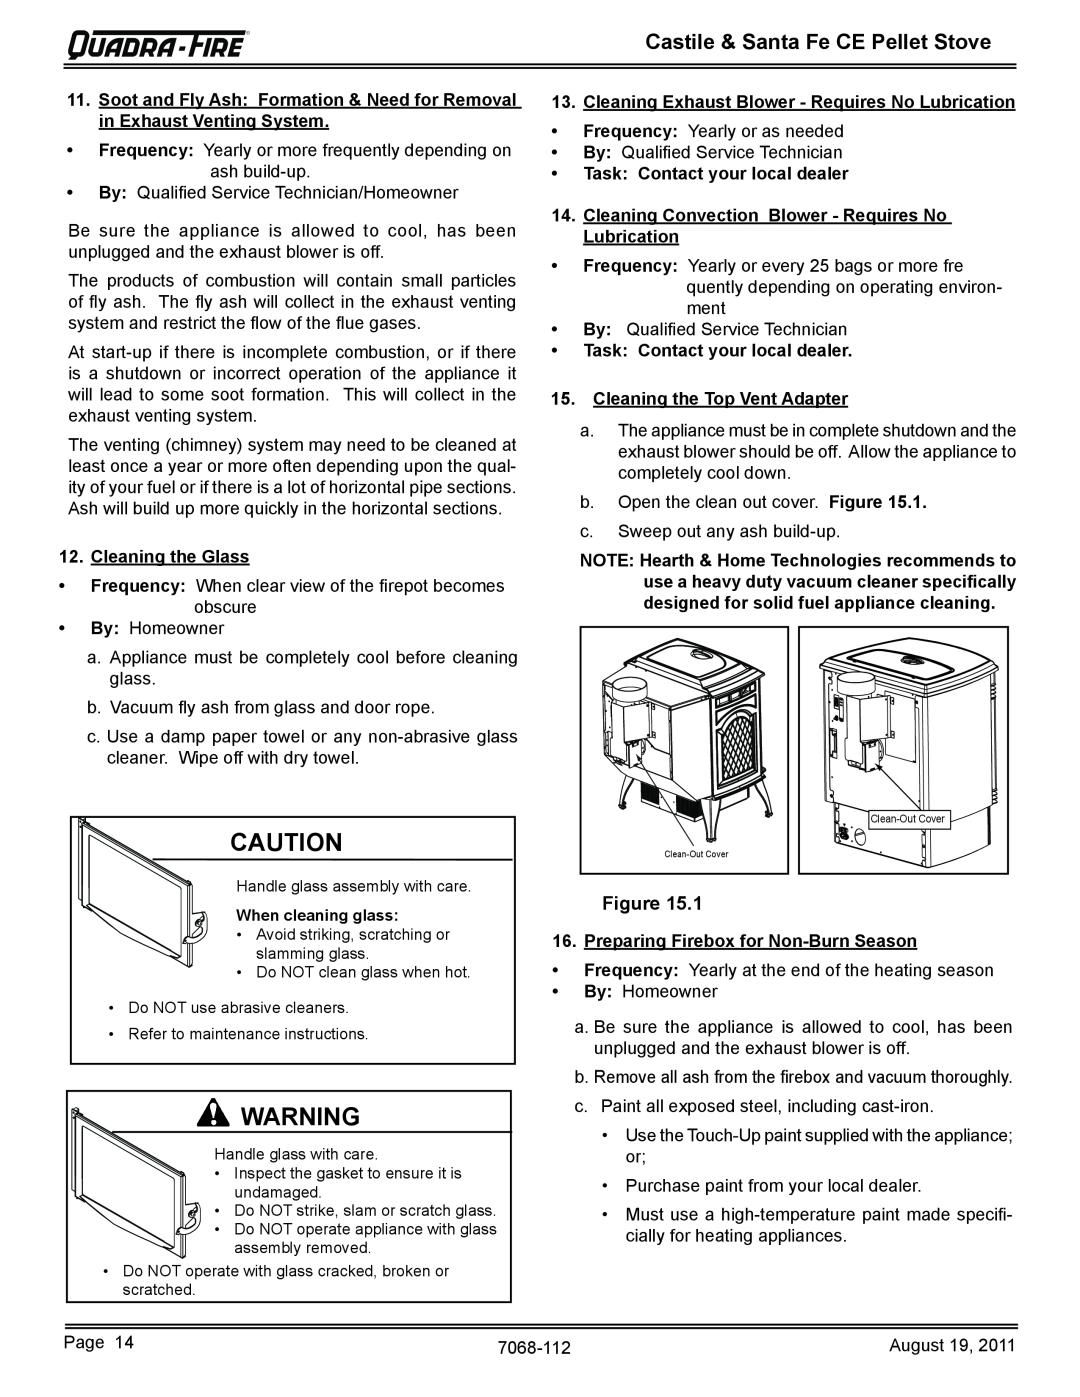 Quadra-Fire 7068-112 owner manual Castile & Santa Fe CE Pellet Stove, Cleaning the Glass, obscure, By Homeowner 